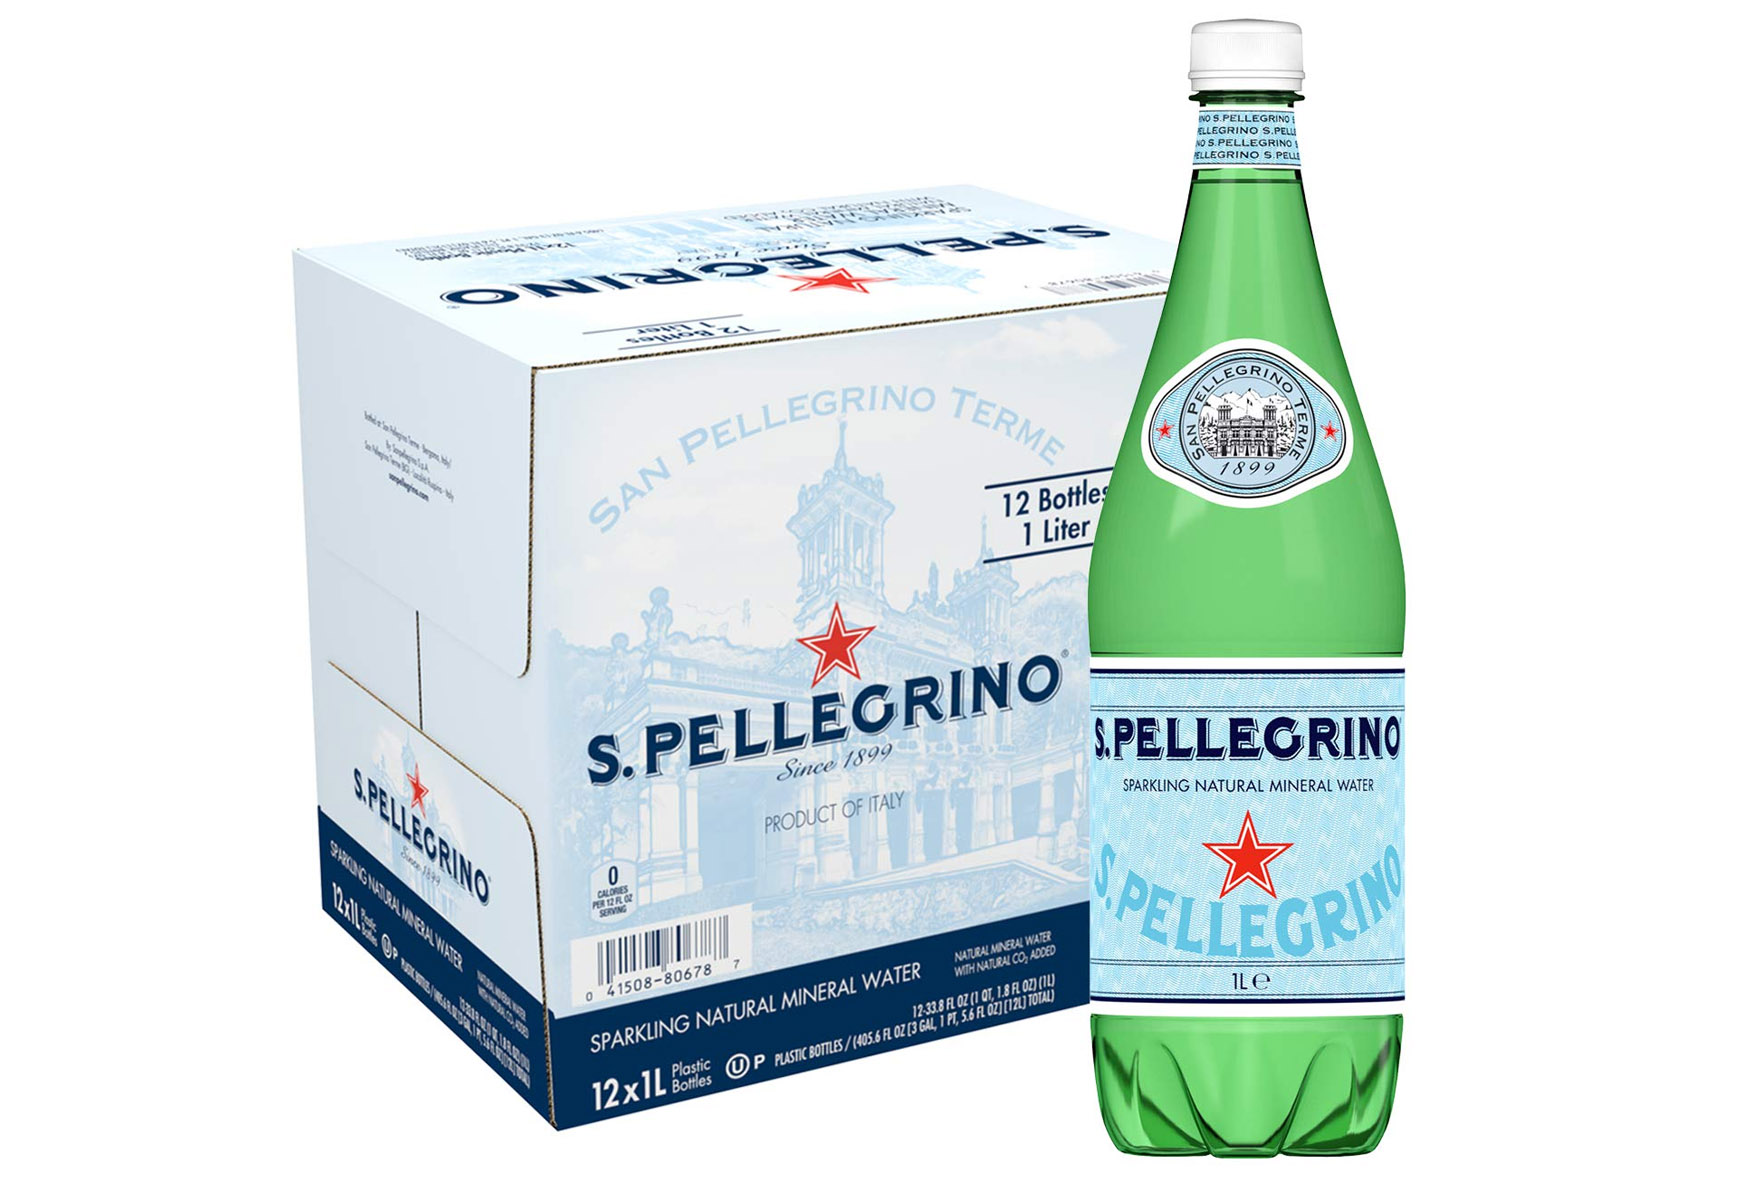 10 Things You Didn't Know About San Pellegrino